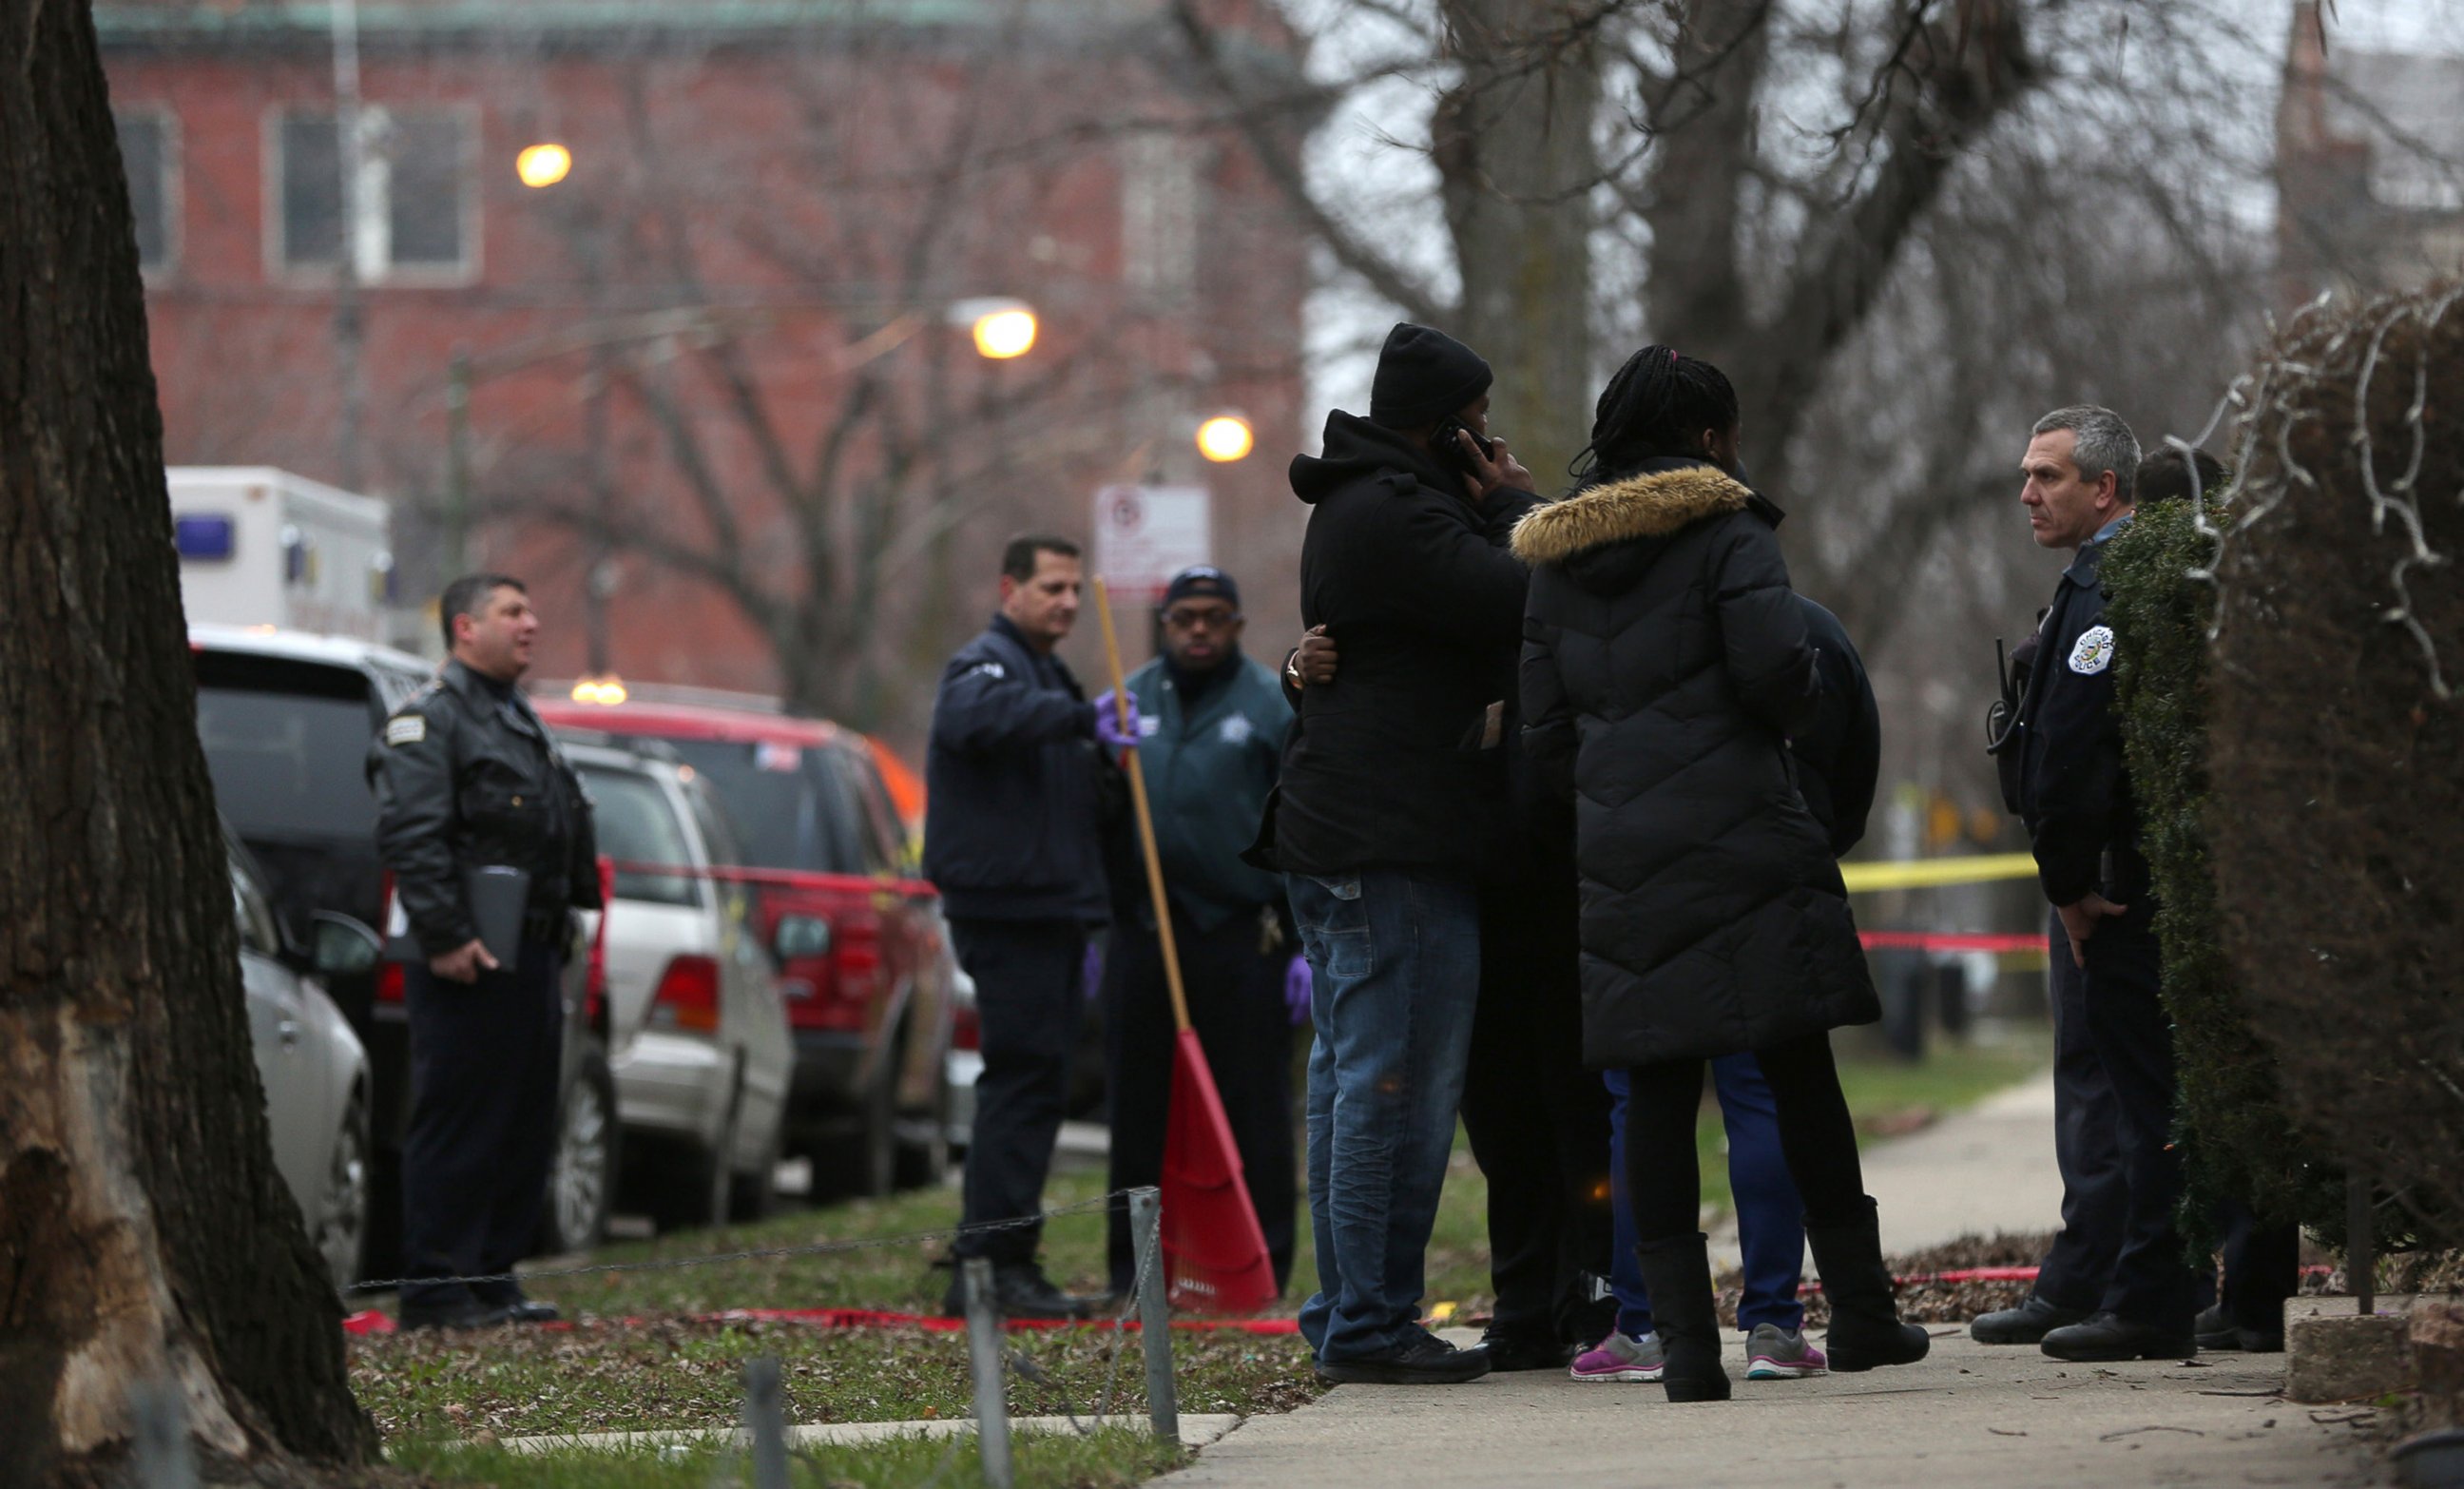 PHOTO: Chicago police talk with relatives of one of the victims as they investigate a double shooting by one of their own, Dec. 26, 2015.